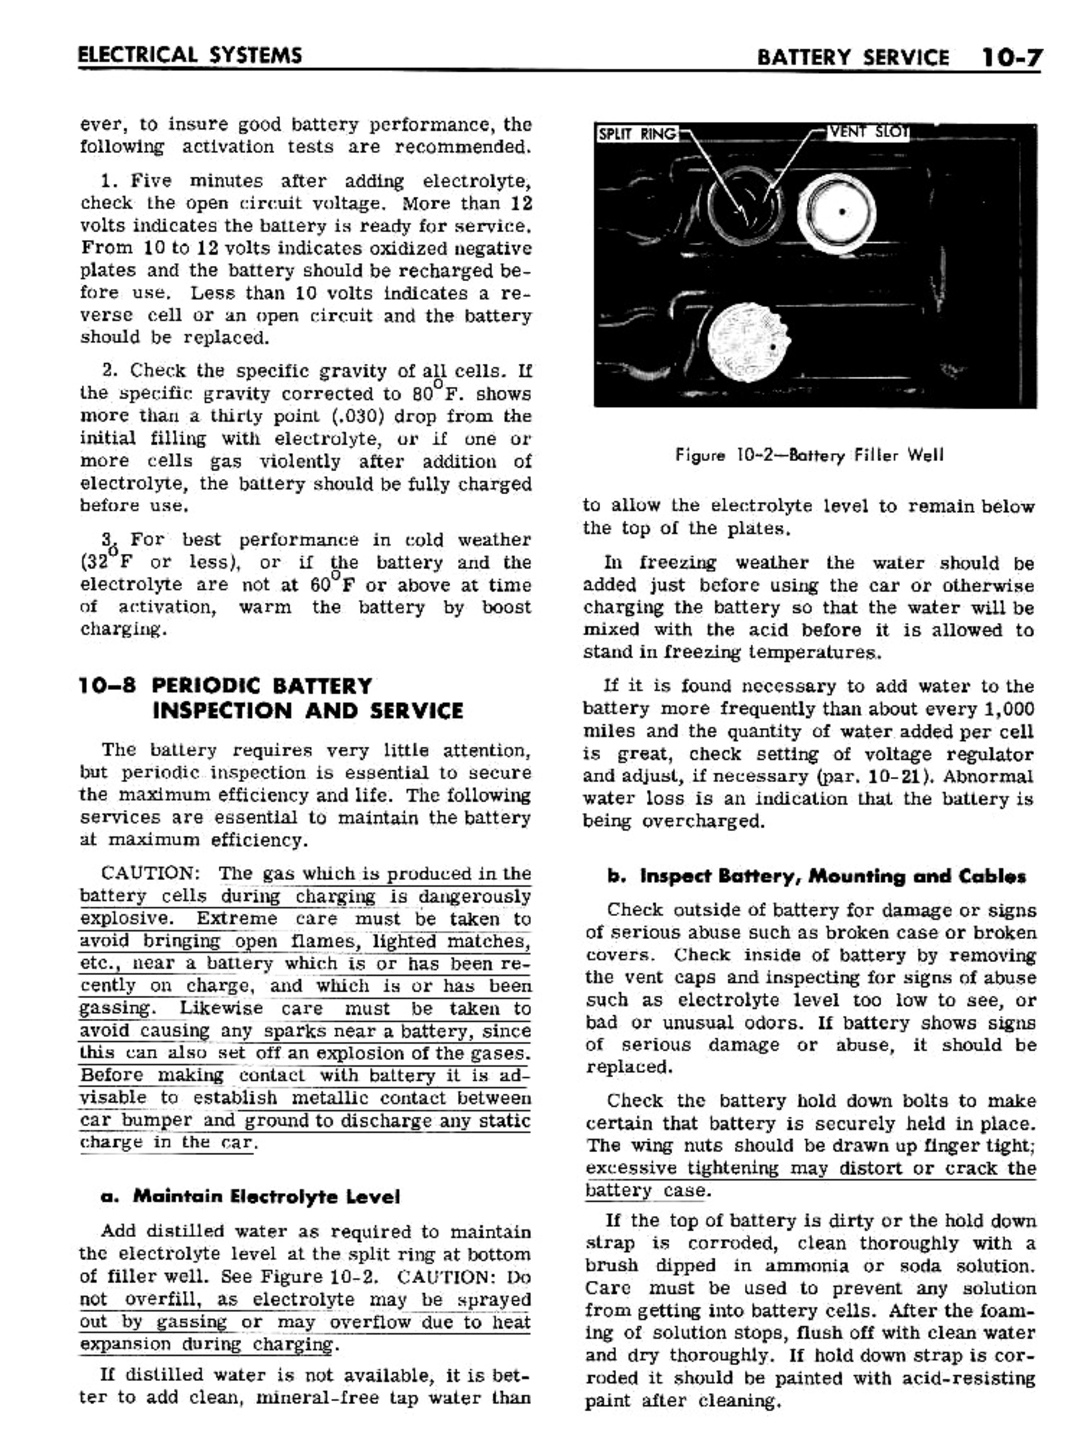 n_10 1961 Buick Shop Manual - Electrical Systems-007-007.jpg